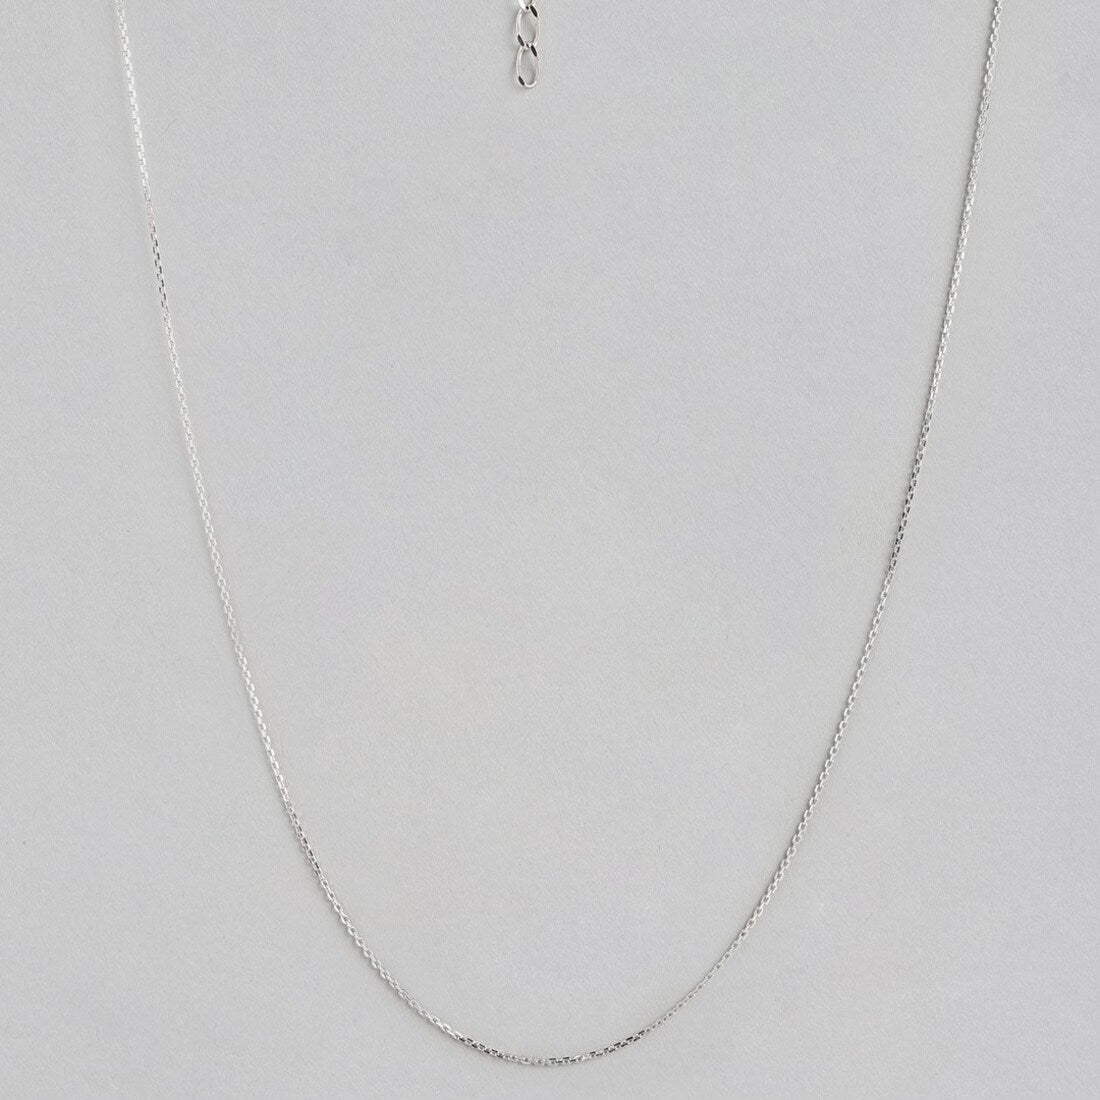 Basic 925 Silver Link Chain